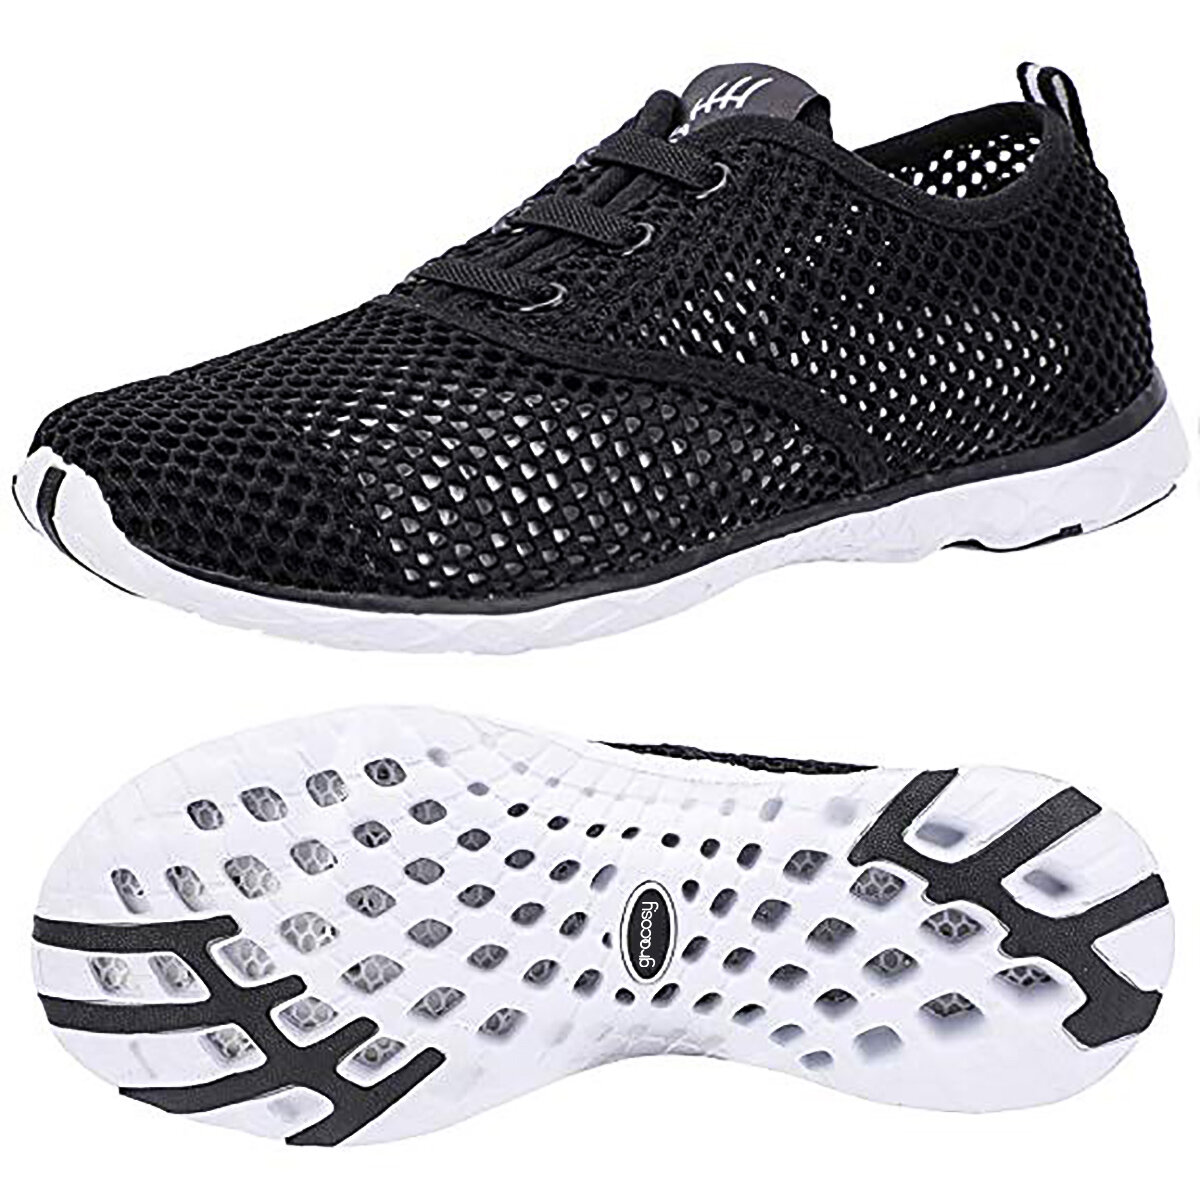 GRACOSY Unisex Water Sport Shoes Quick Drying Aqua Beach Barefoot Shoes Outdoor Slip on Sneaker for Fishing Surfing